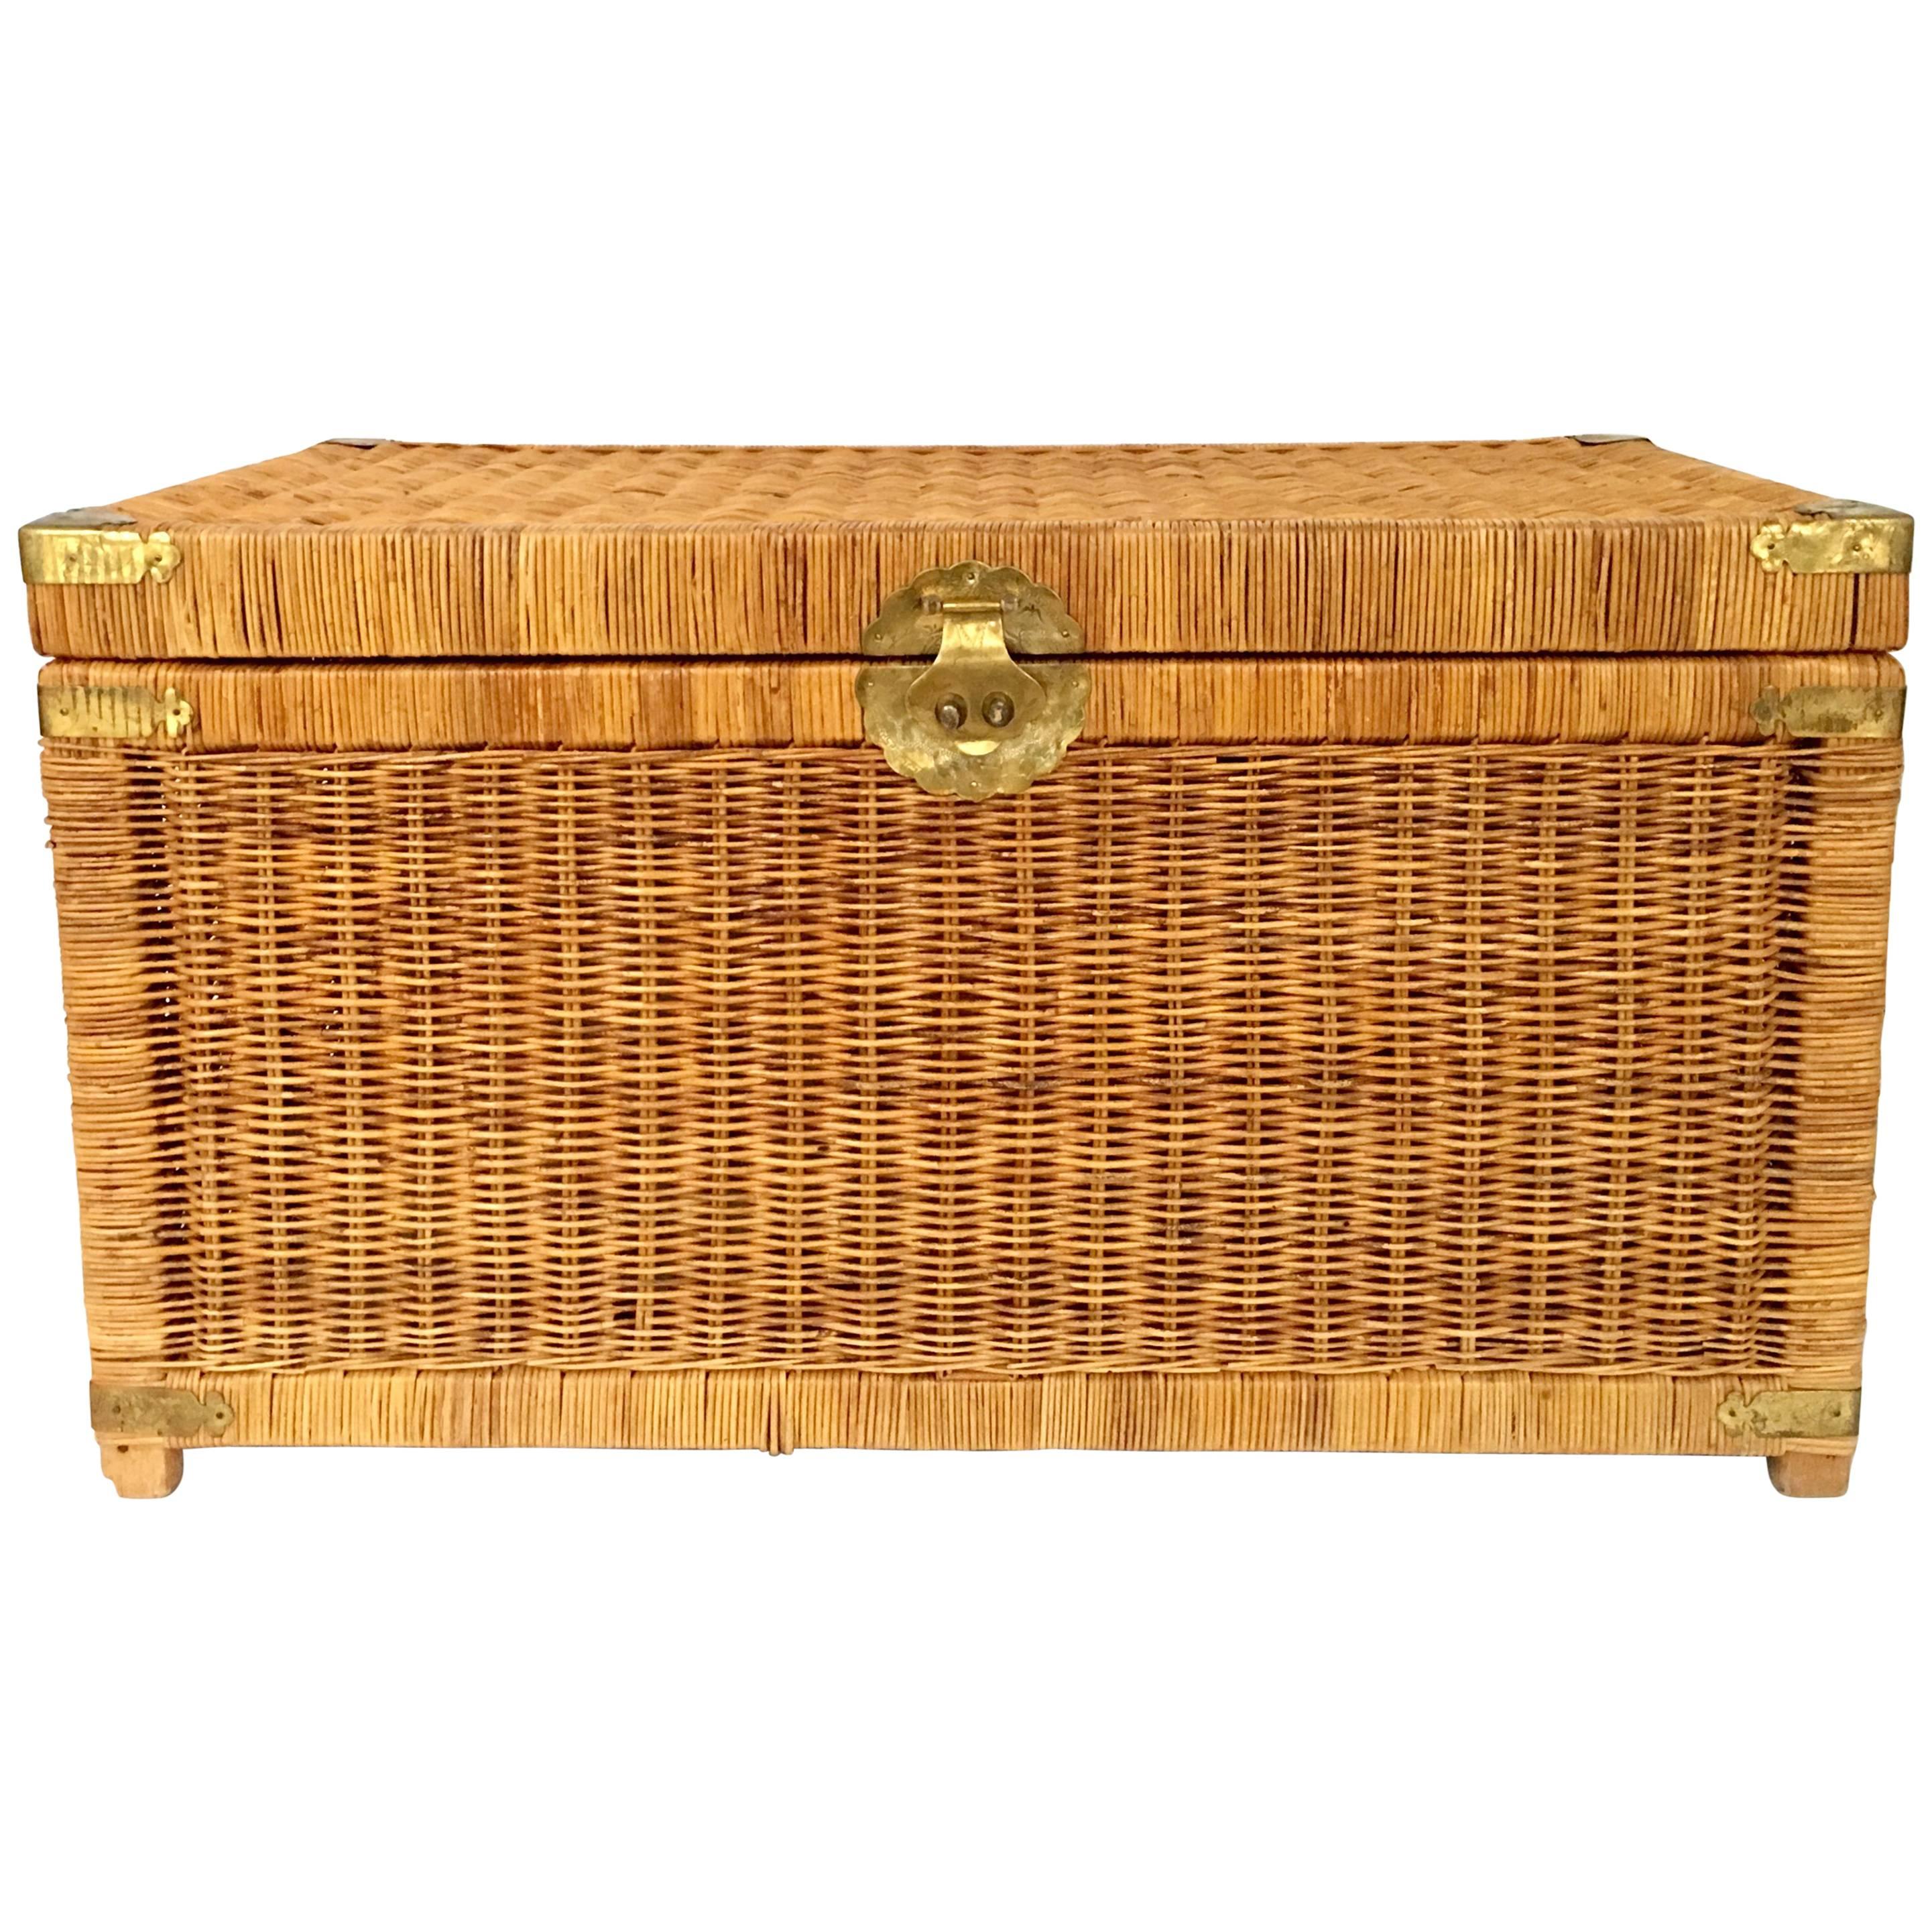 20th Century Wicker & Brass Chinoiserie Style Trunk Chest